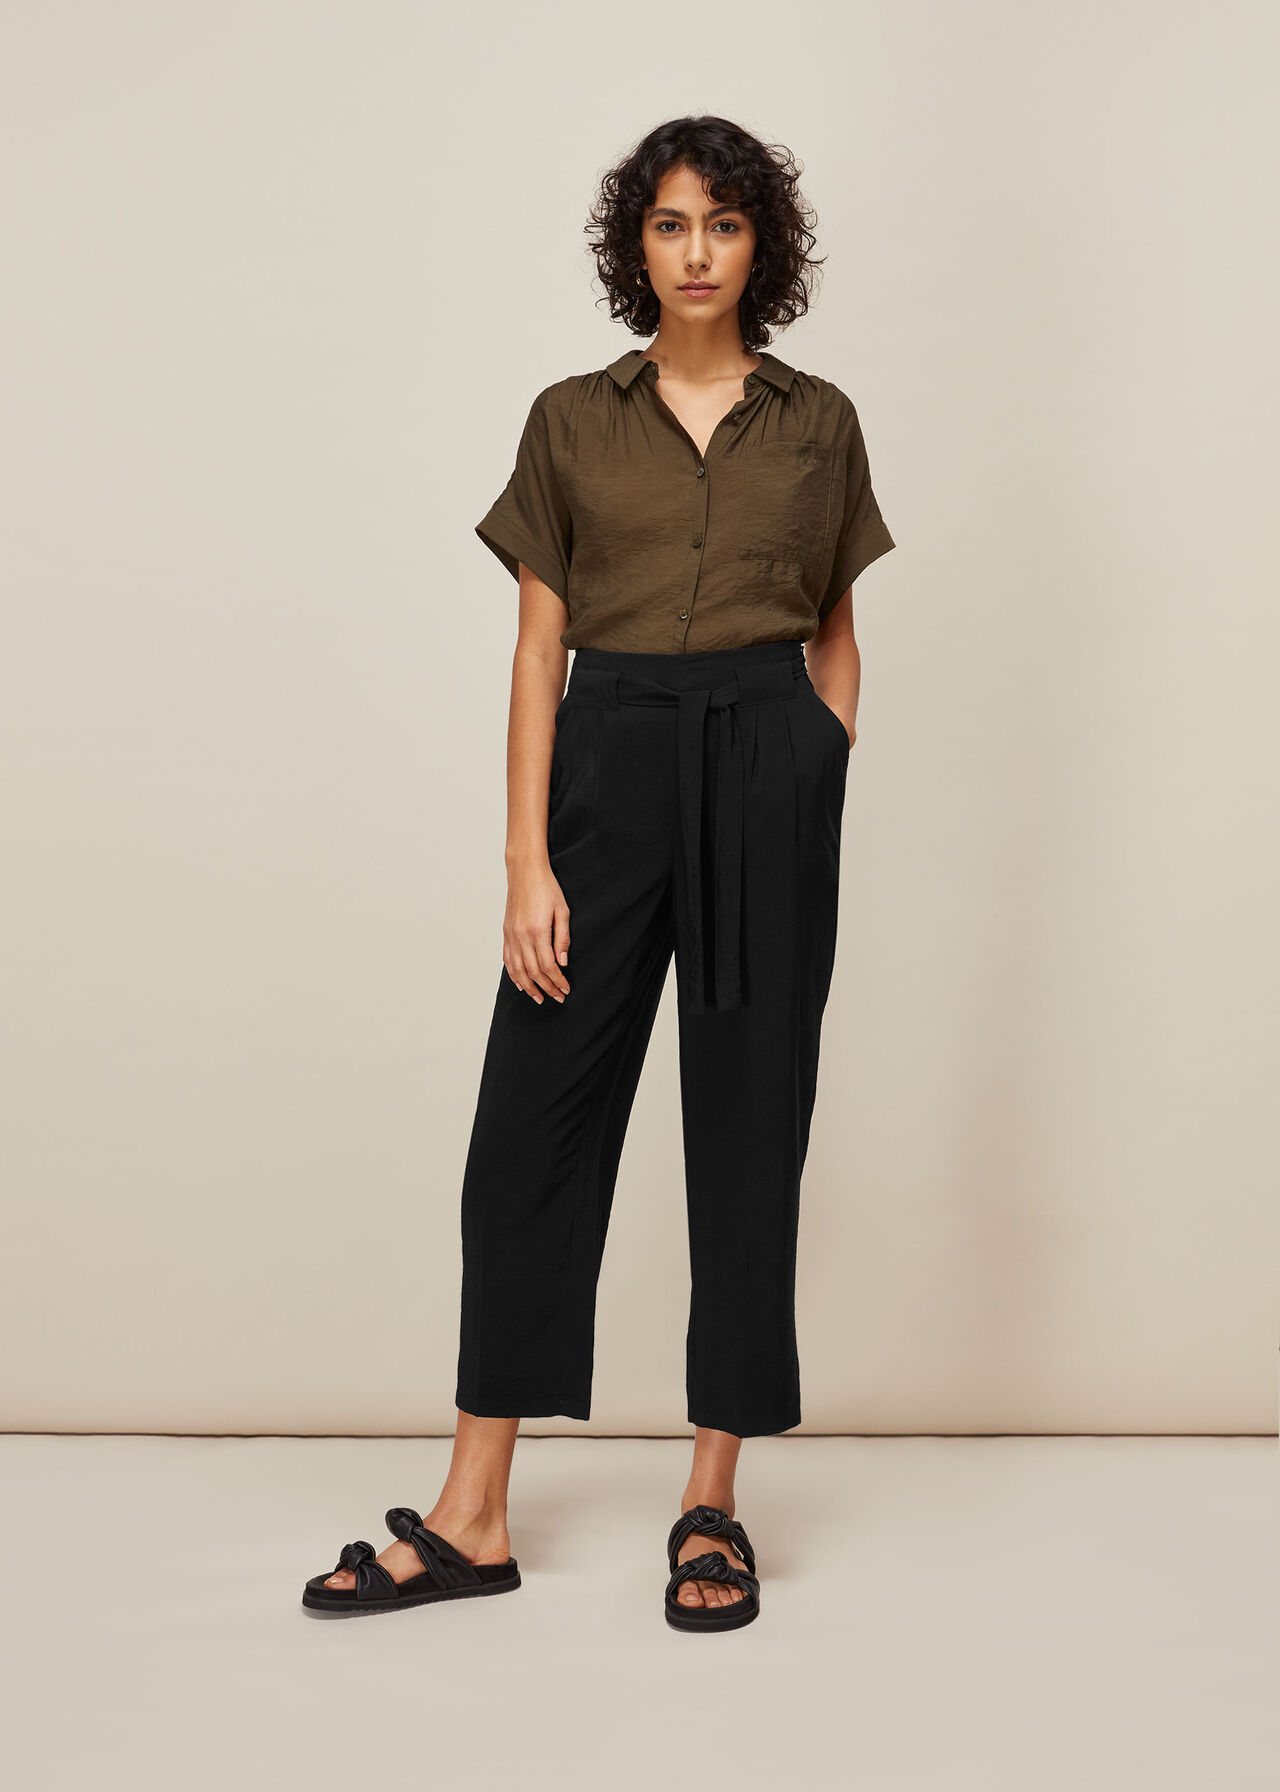 Belted Casual Crop Trouser Black